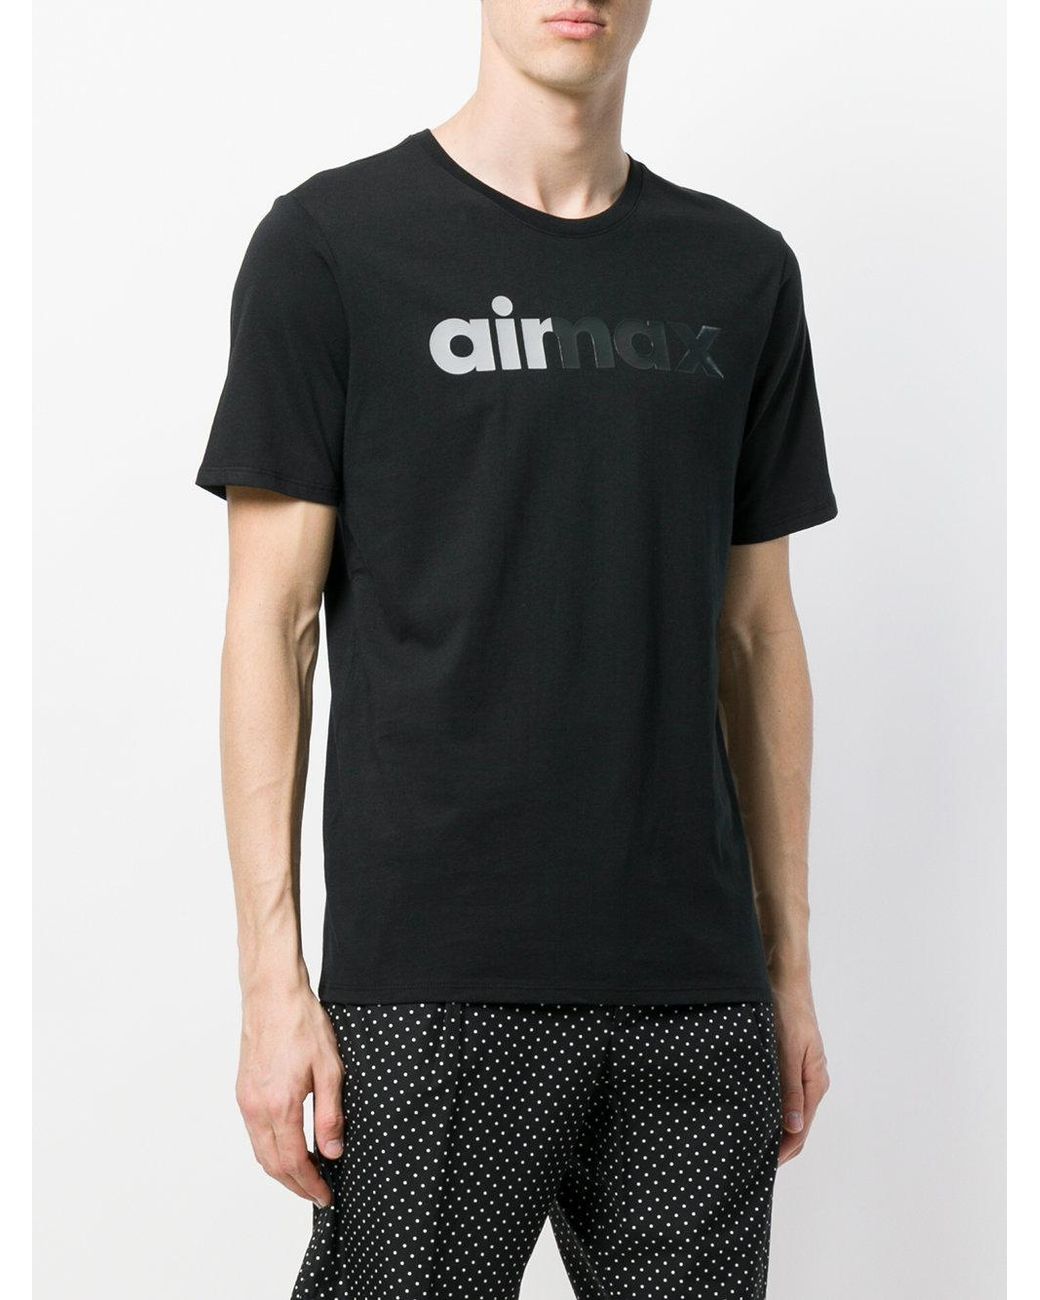 Nike Cotton Air Max 95 Printed T-shirt in Black for Men | Lyst